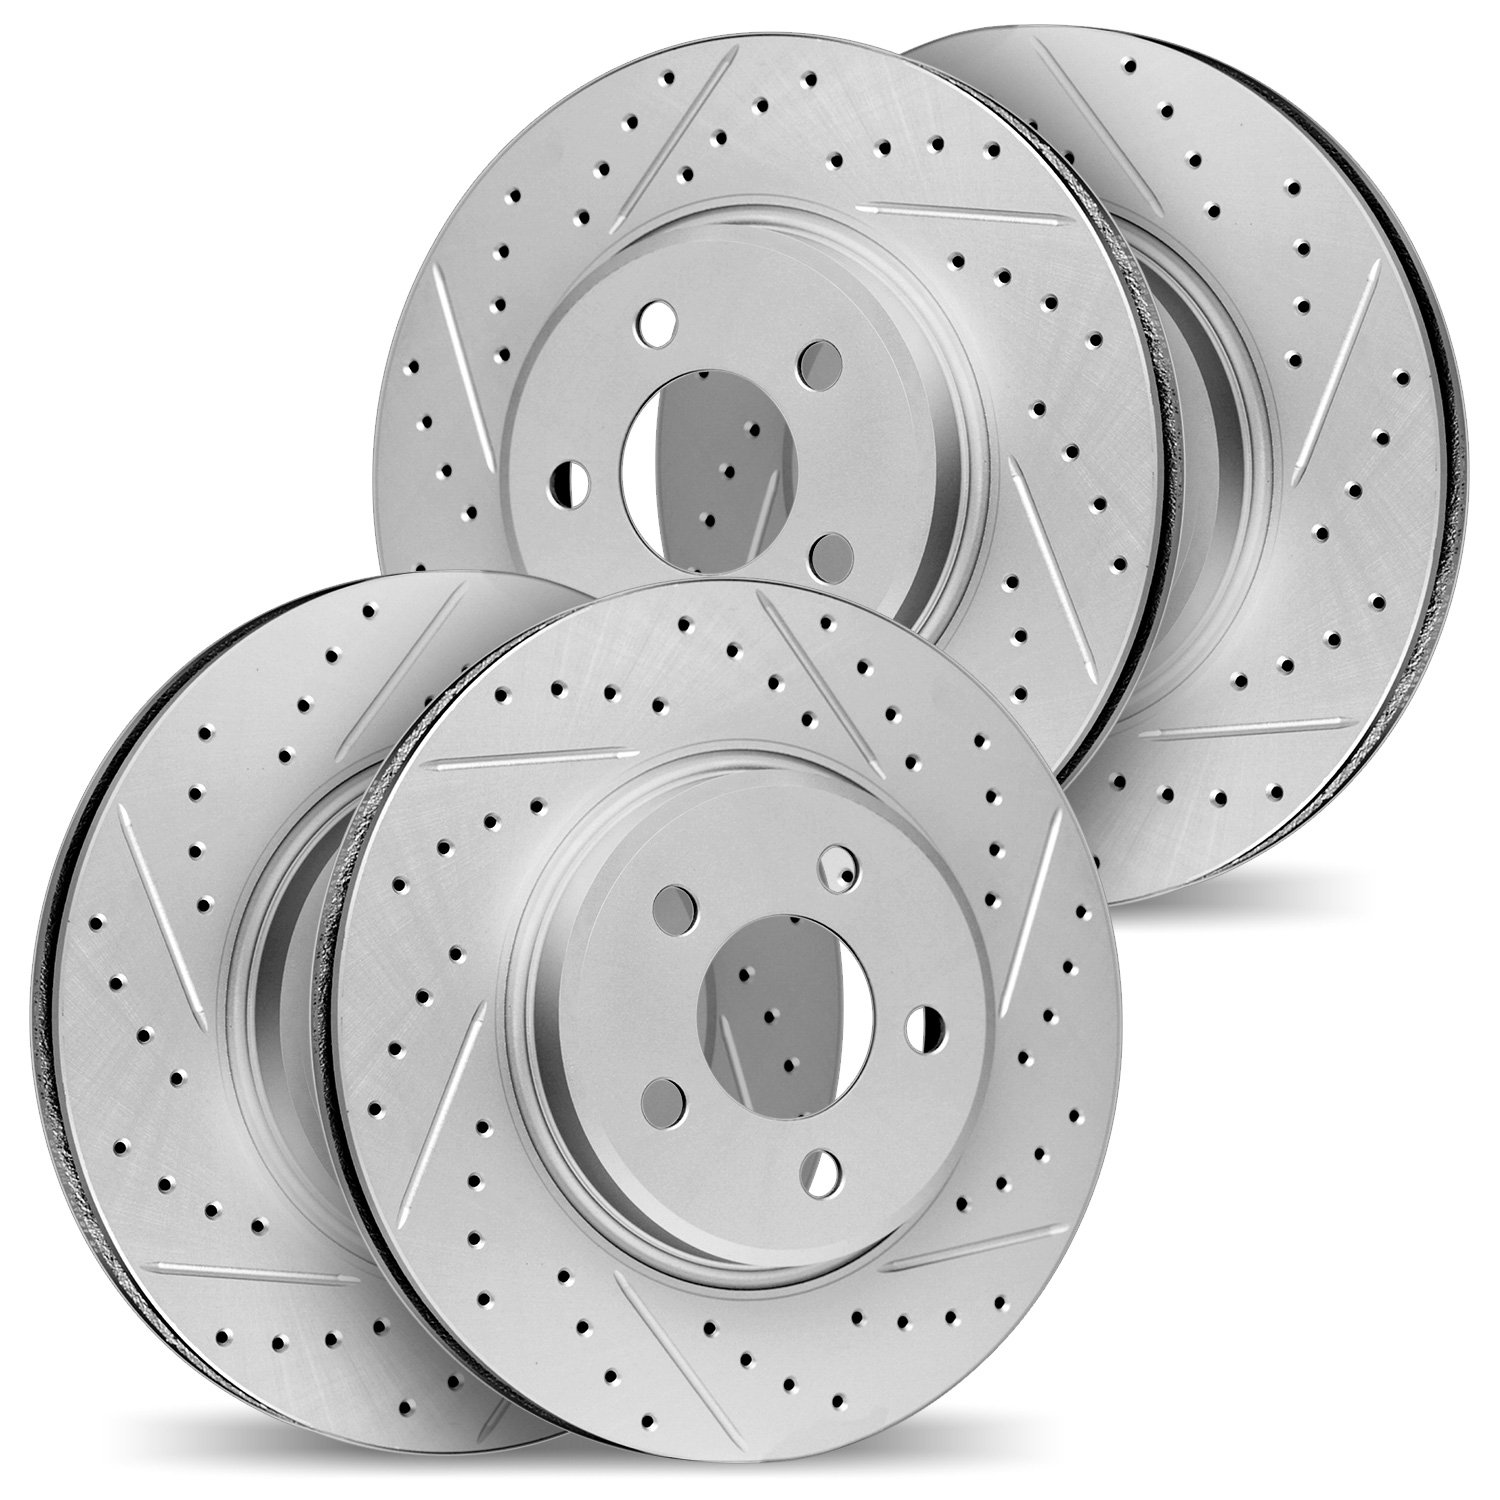 2004-31047 Geoperformance Drilled/Slotted Brake Rotors, 2005-2008 BMW, Position: Front and Rear